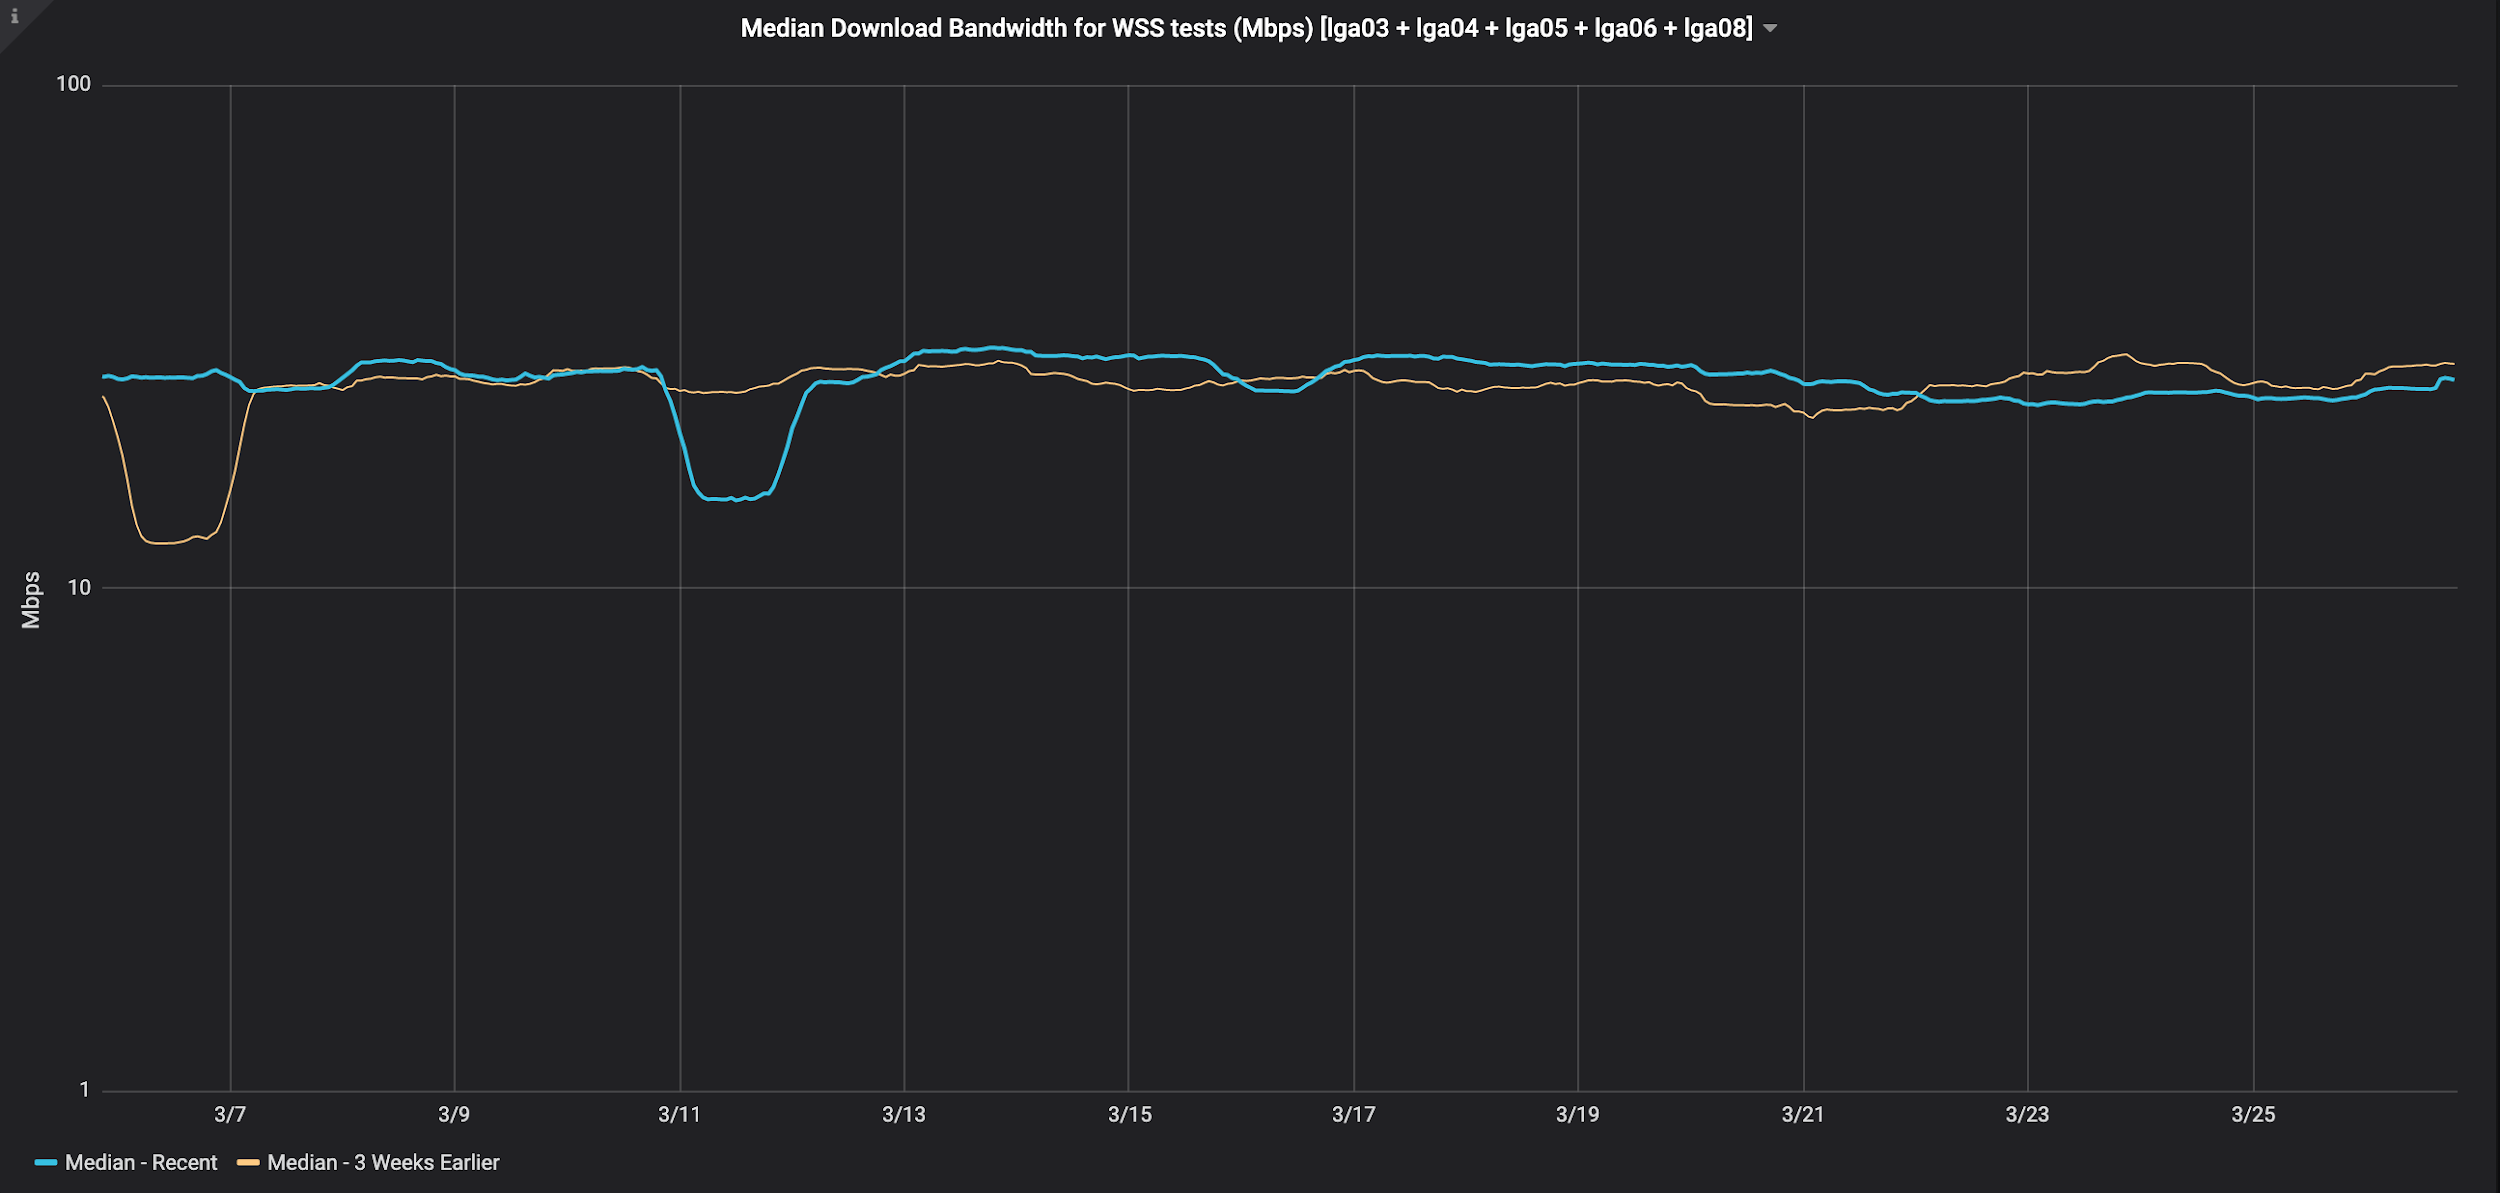 Median Download Bandwidth for WSS tests, New York, USA (Mbps)